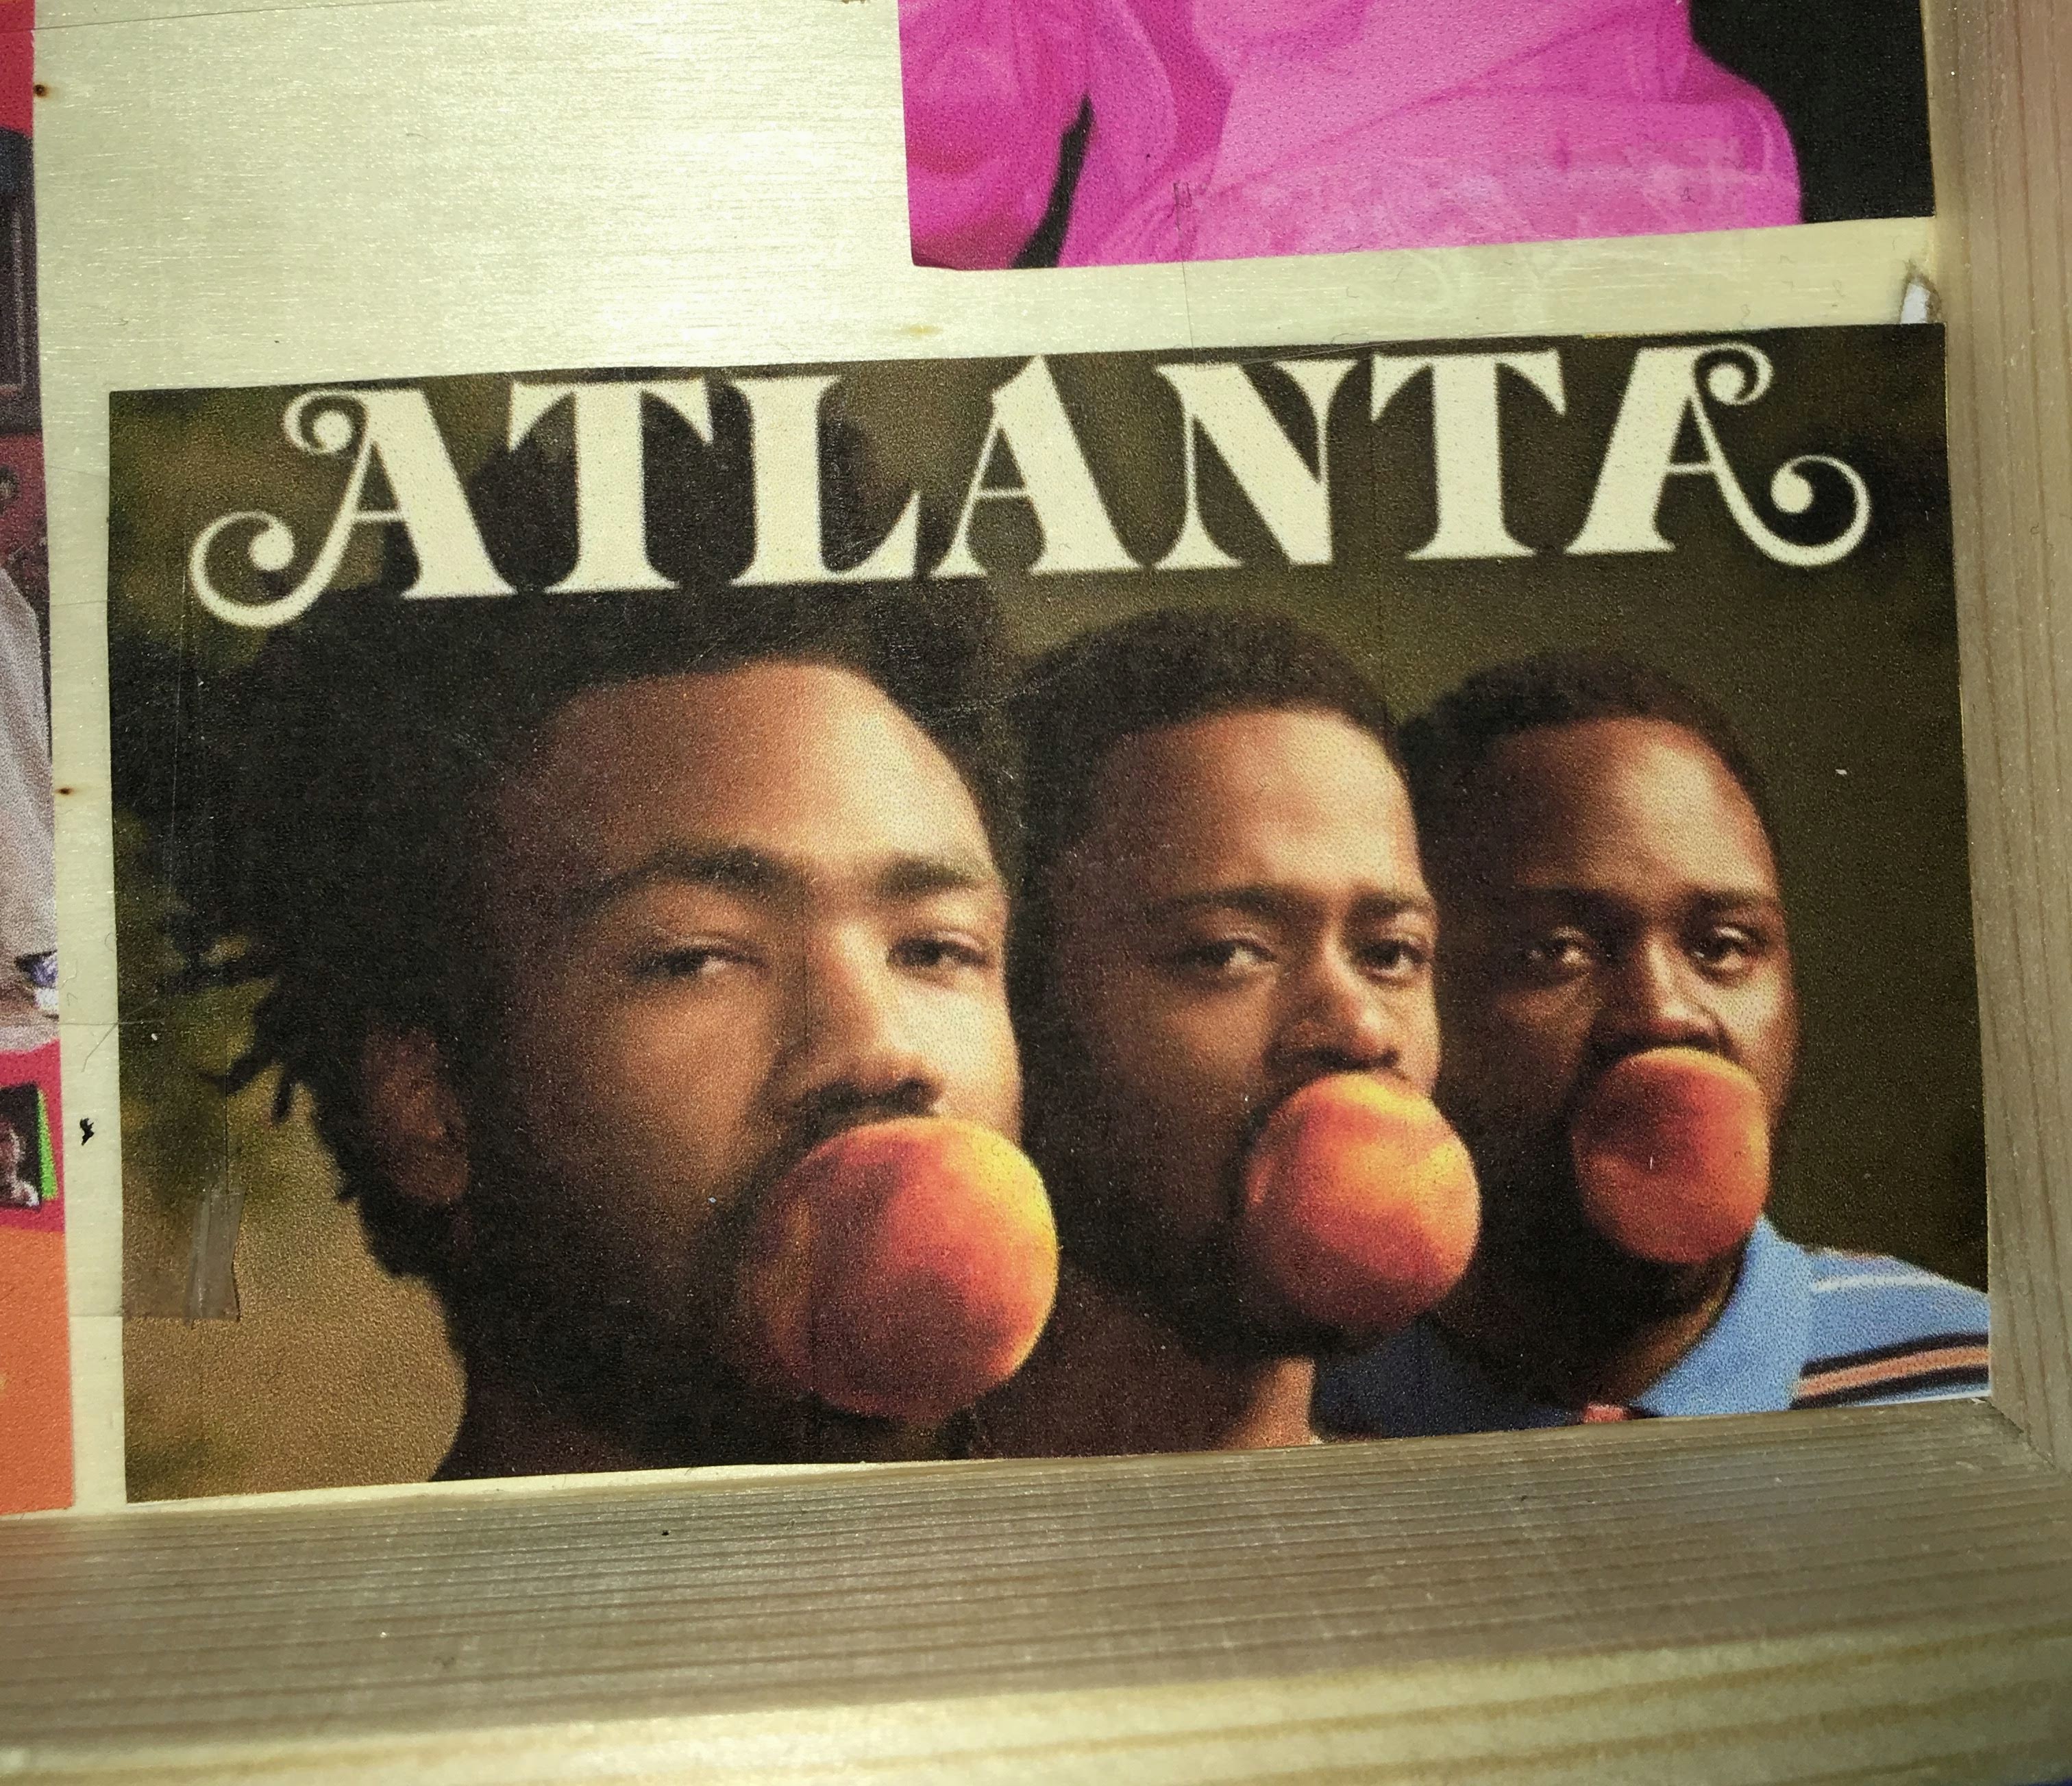 This image is of the television series ‘Atlanta’(2016-present). I placed this in the box because it’s not only a favorite show of mine, but the creator of the show, Donald Glover aka Childish Gambino, is an example of how hip hop has been present in other forms of media, such as television.